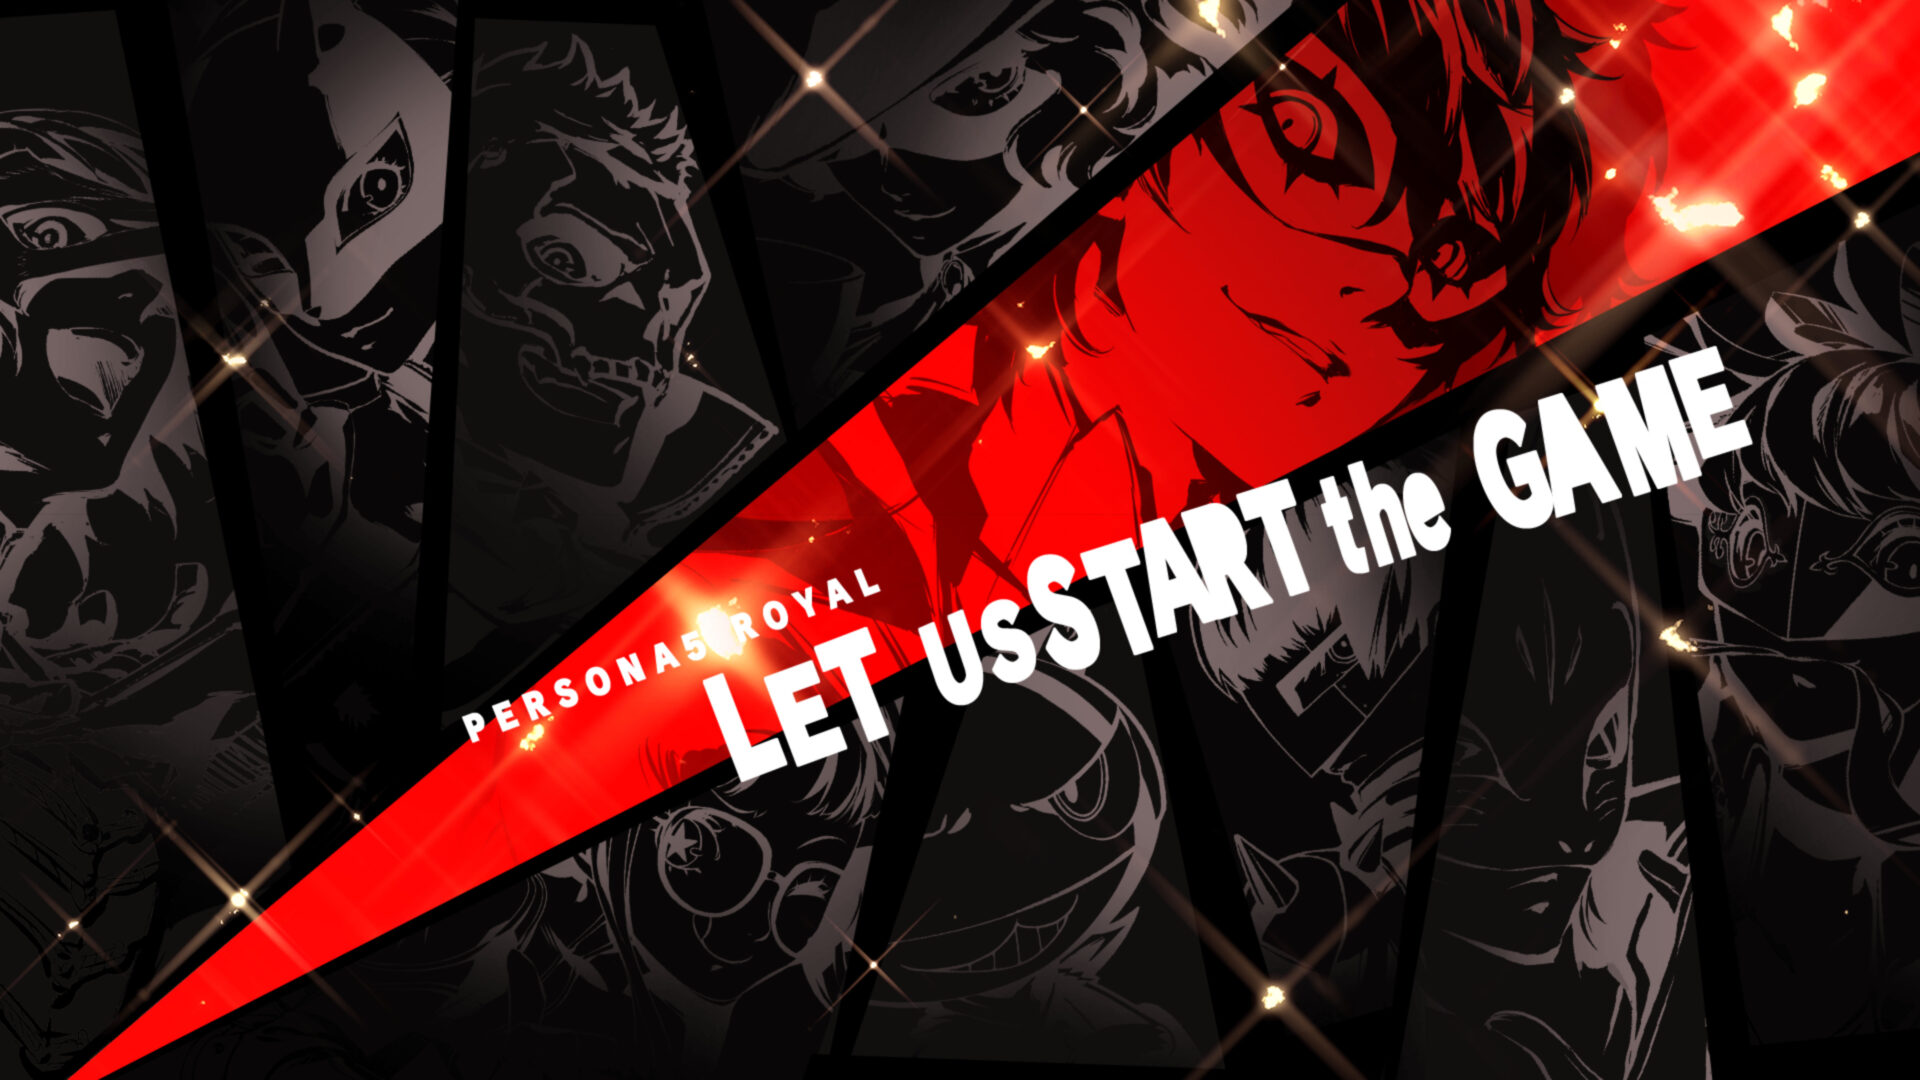 Persona 5 Royal (for PC) Review